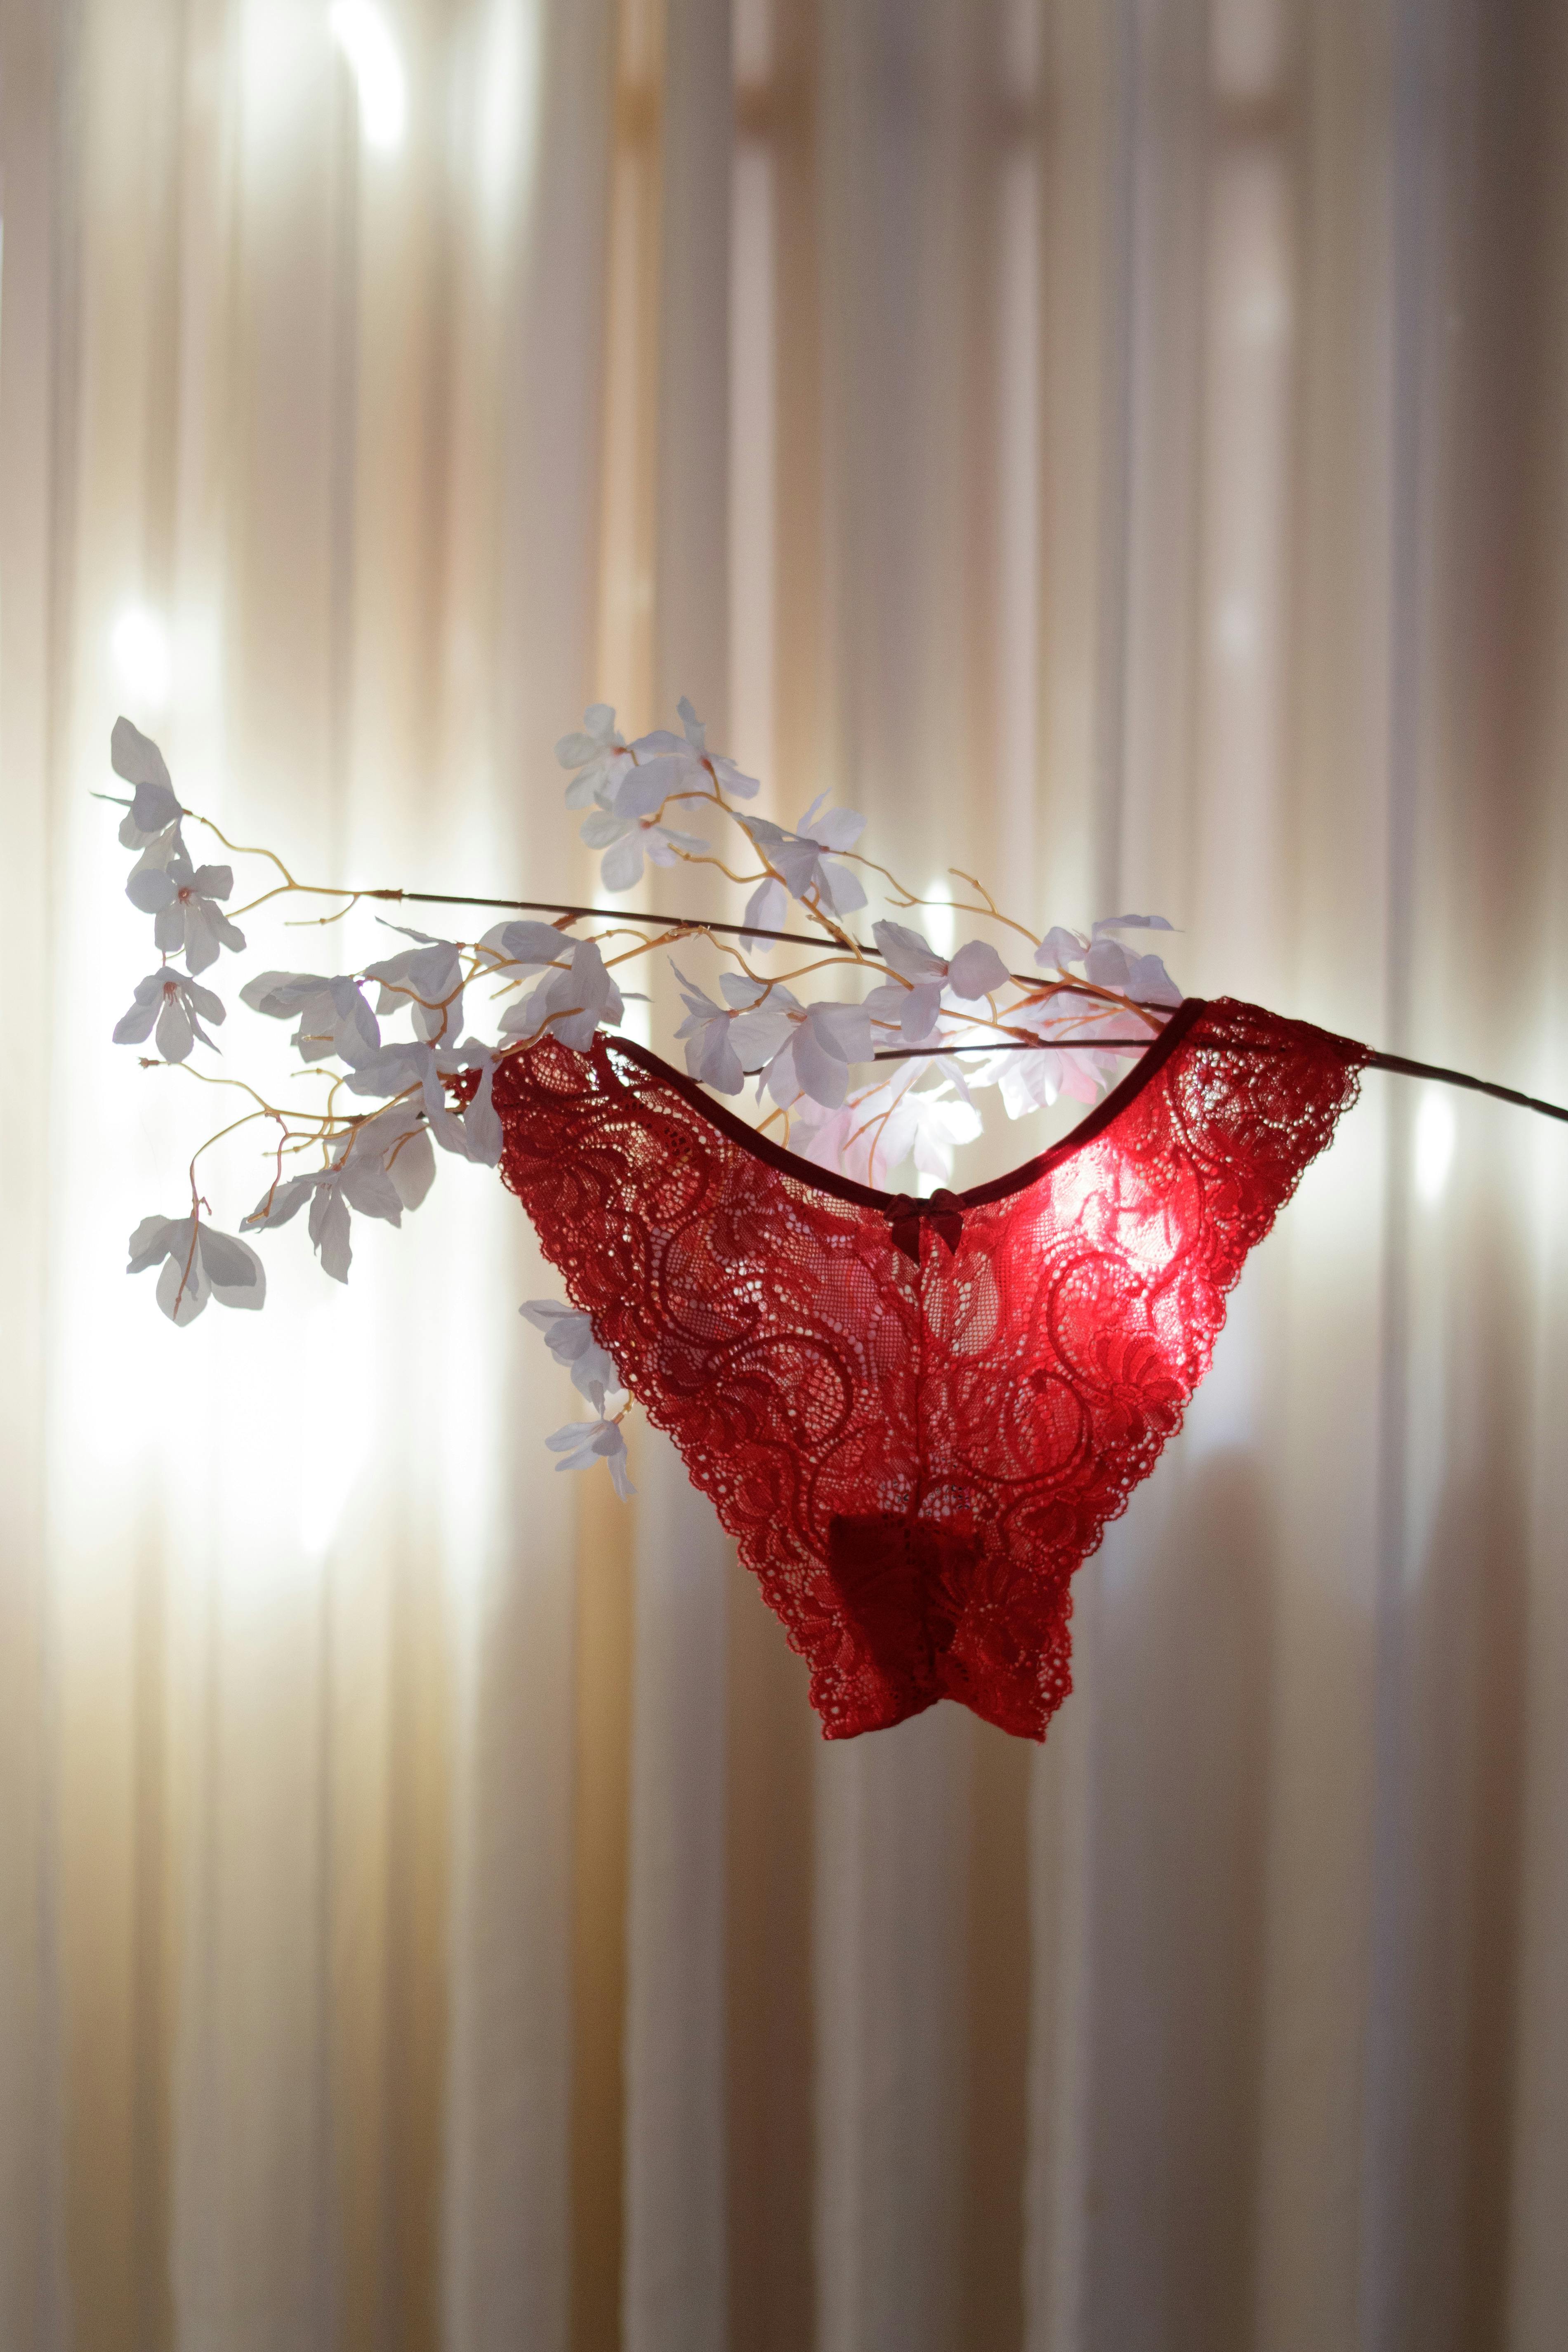 Red Lace Lingerie, Red Lace Knickers, Lace Panties, Red Panties